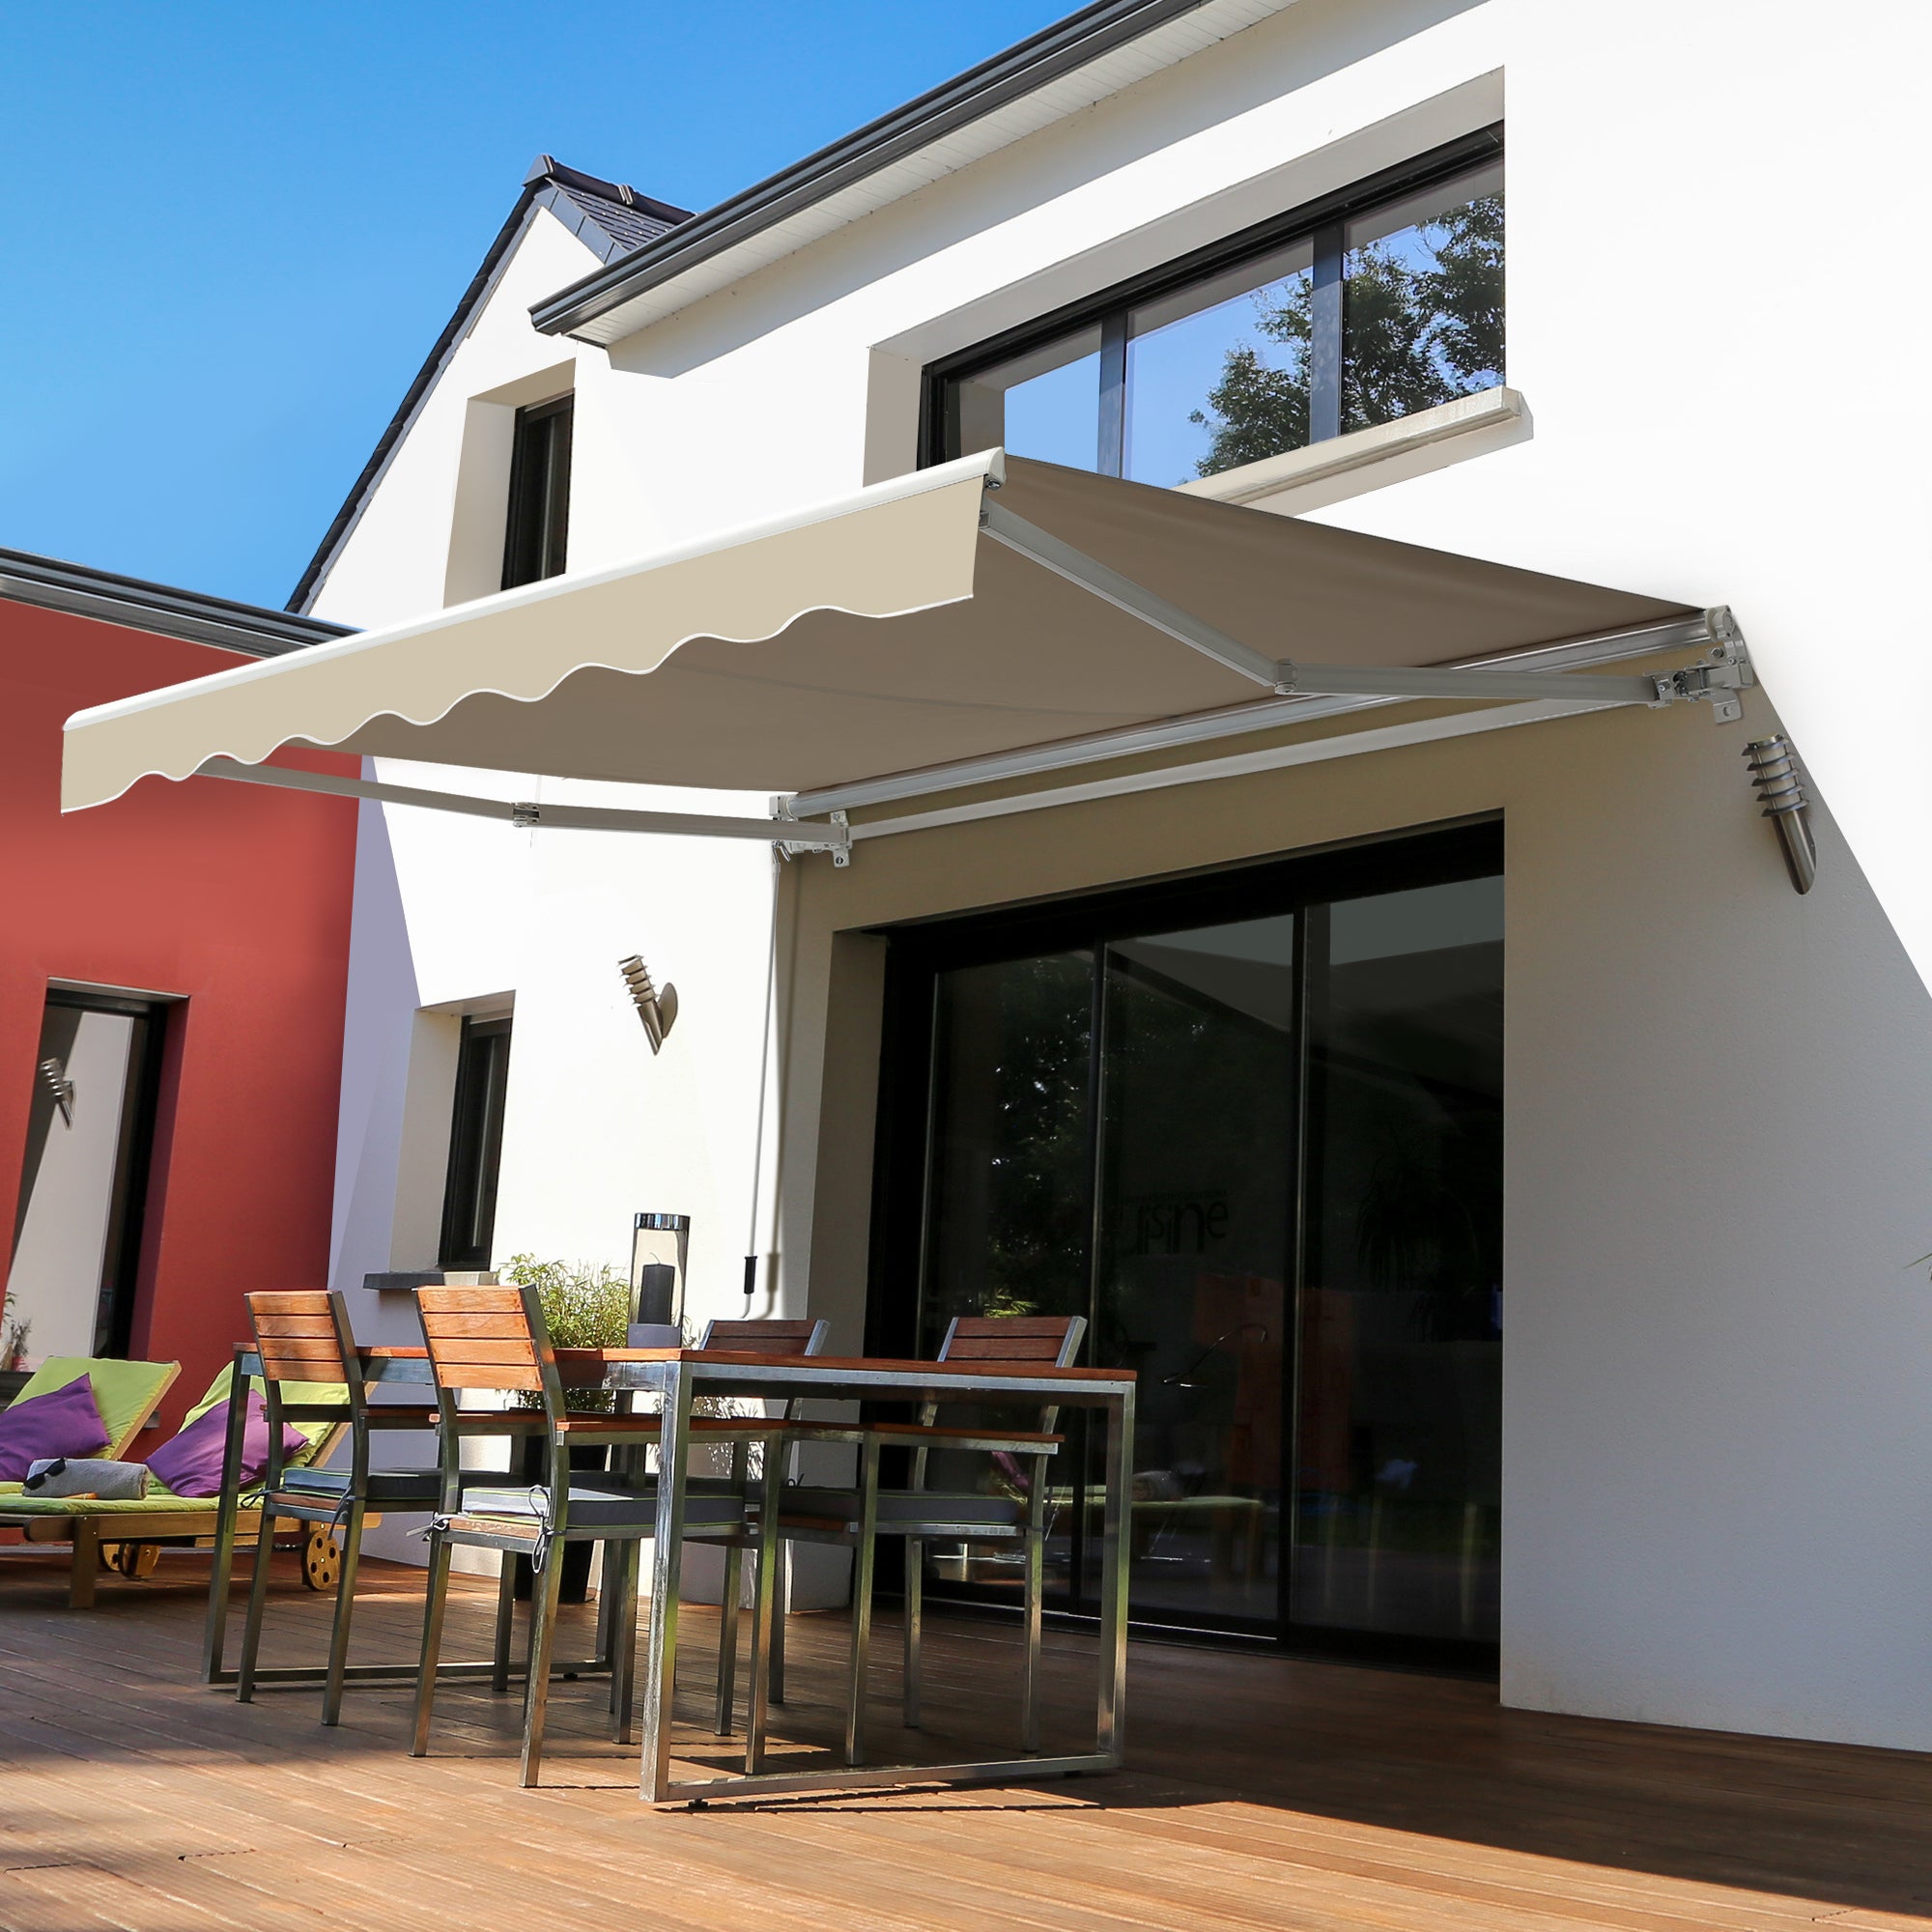 Outsunny 2.5x2 m Manual Retractable Awning-Beige Canopy/White Frame - Inspirely